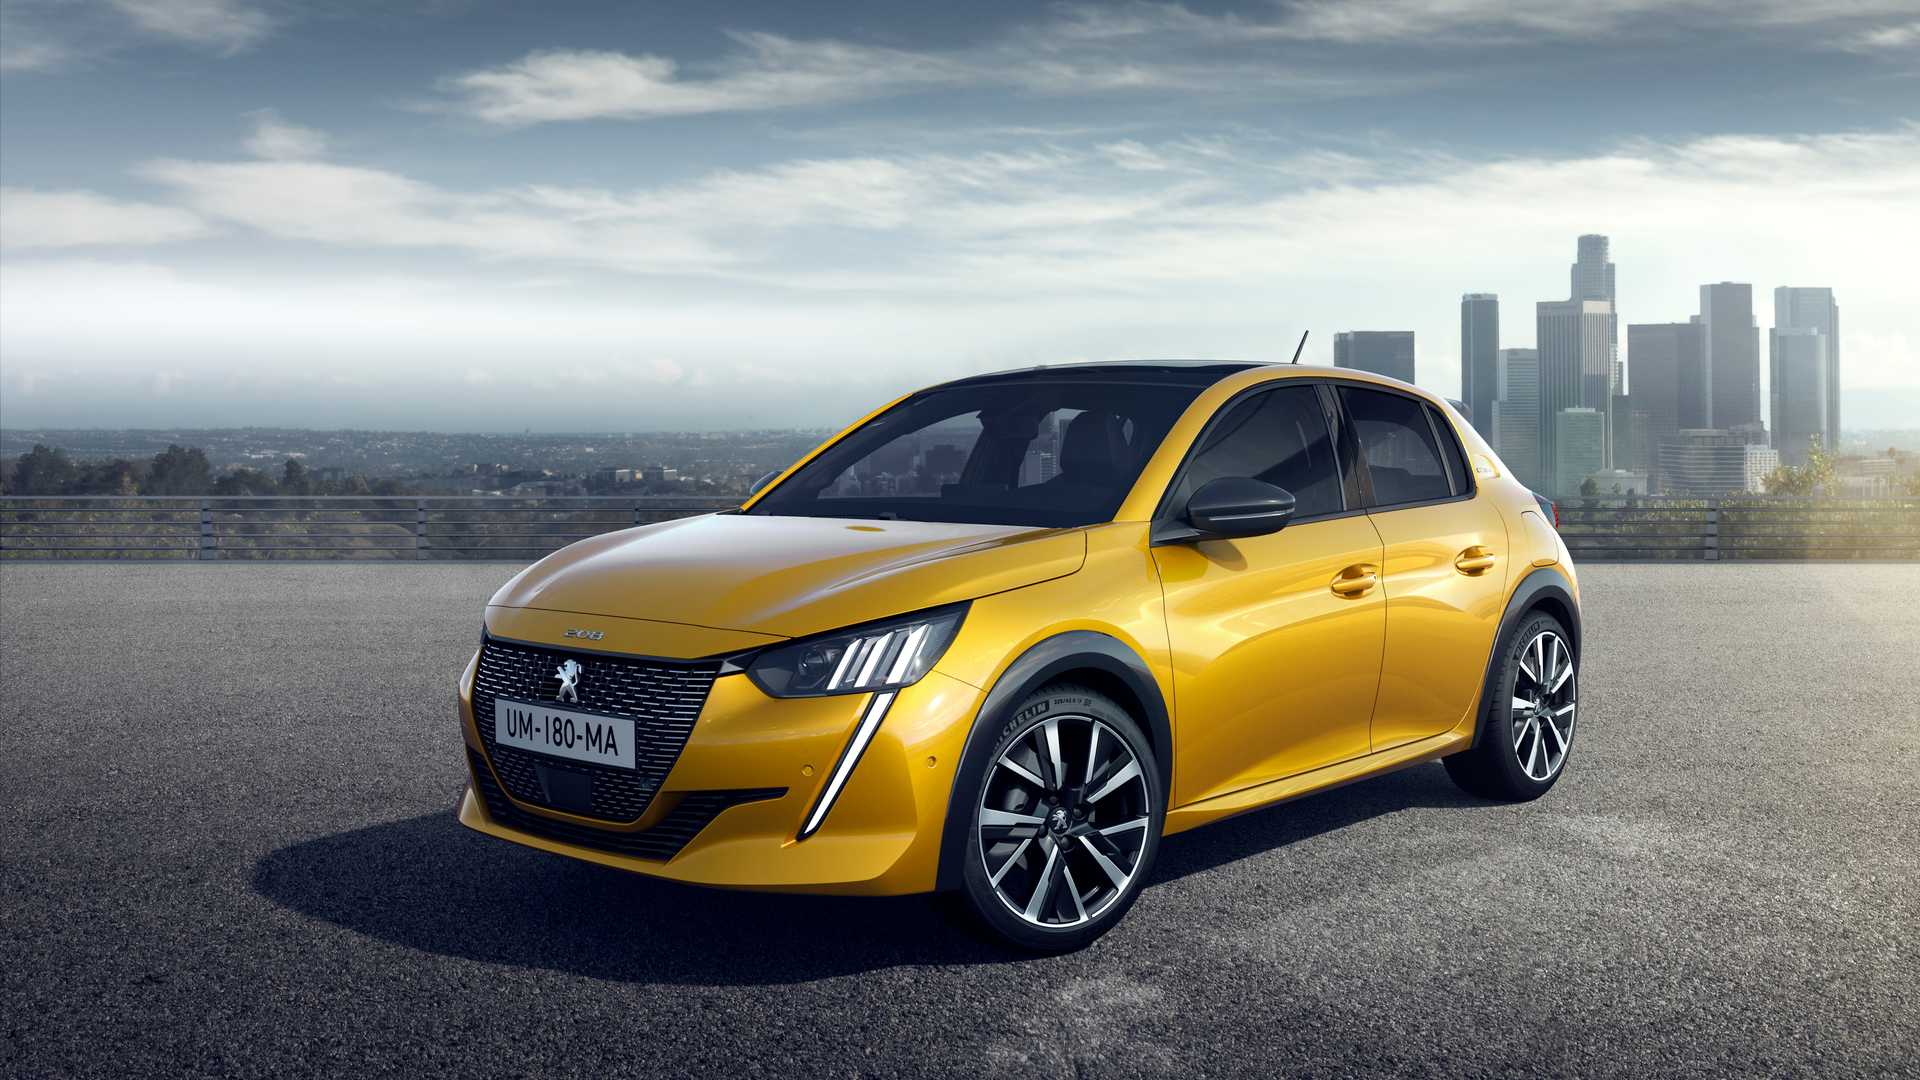 Peugeot Revealed With More Style And Sophistication